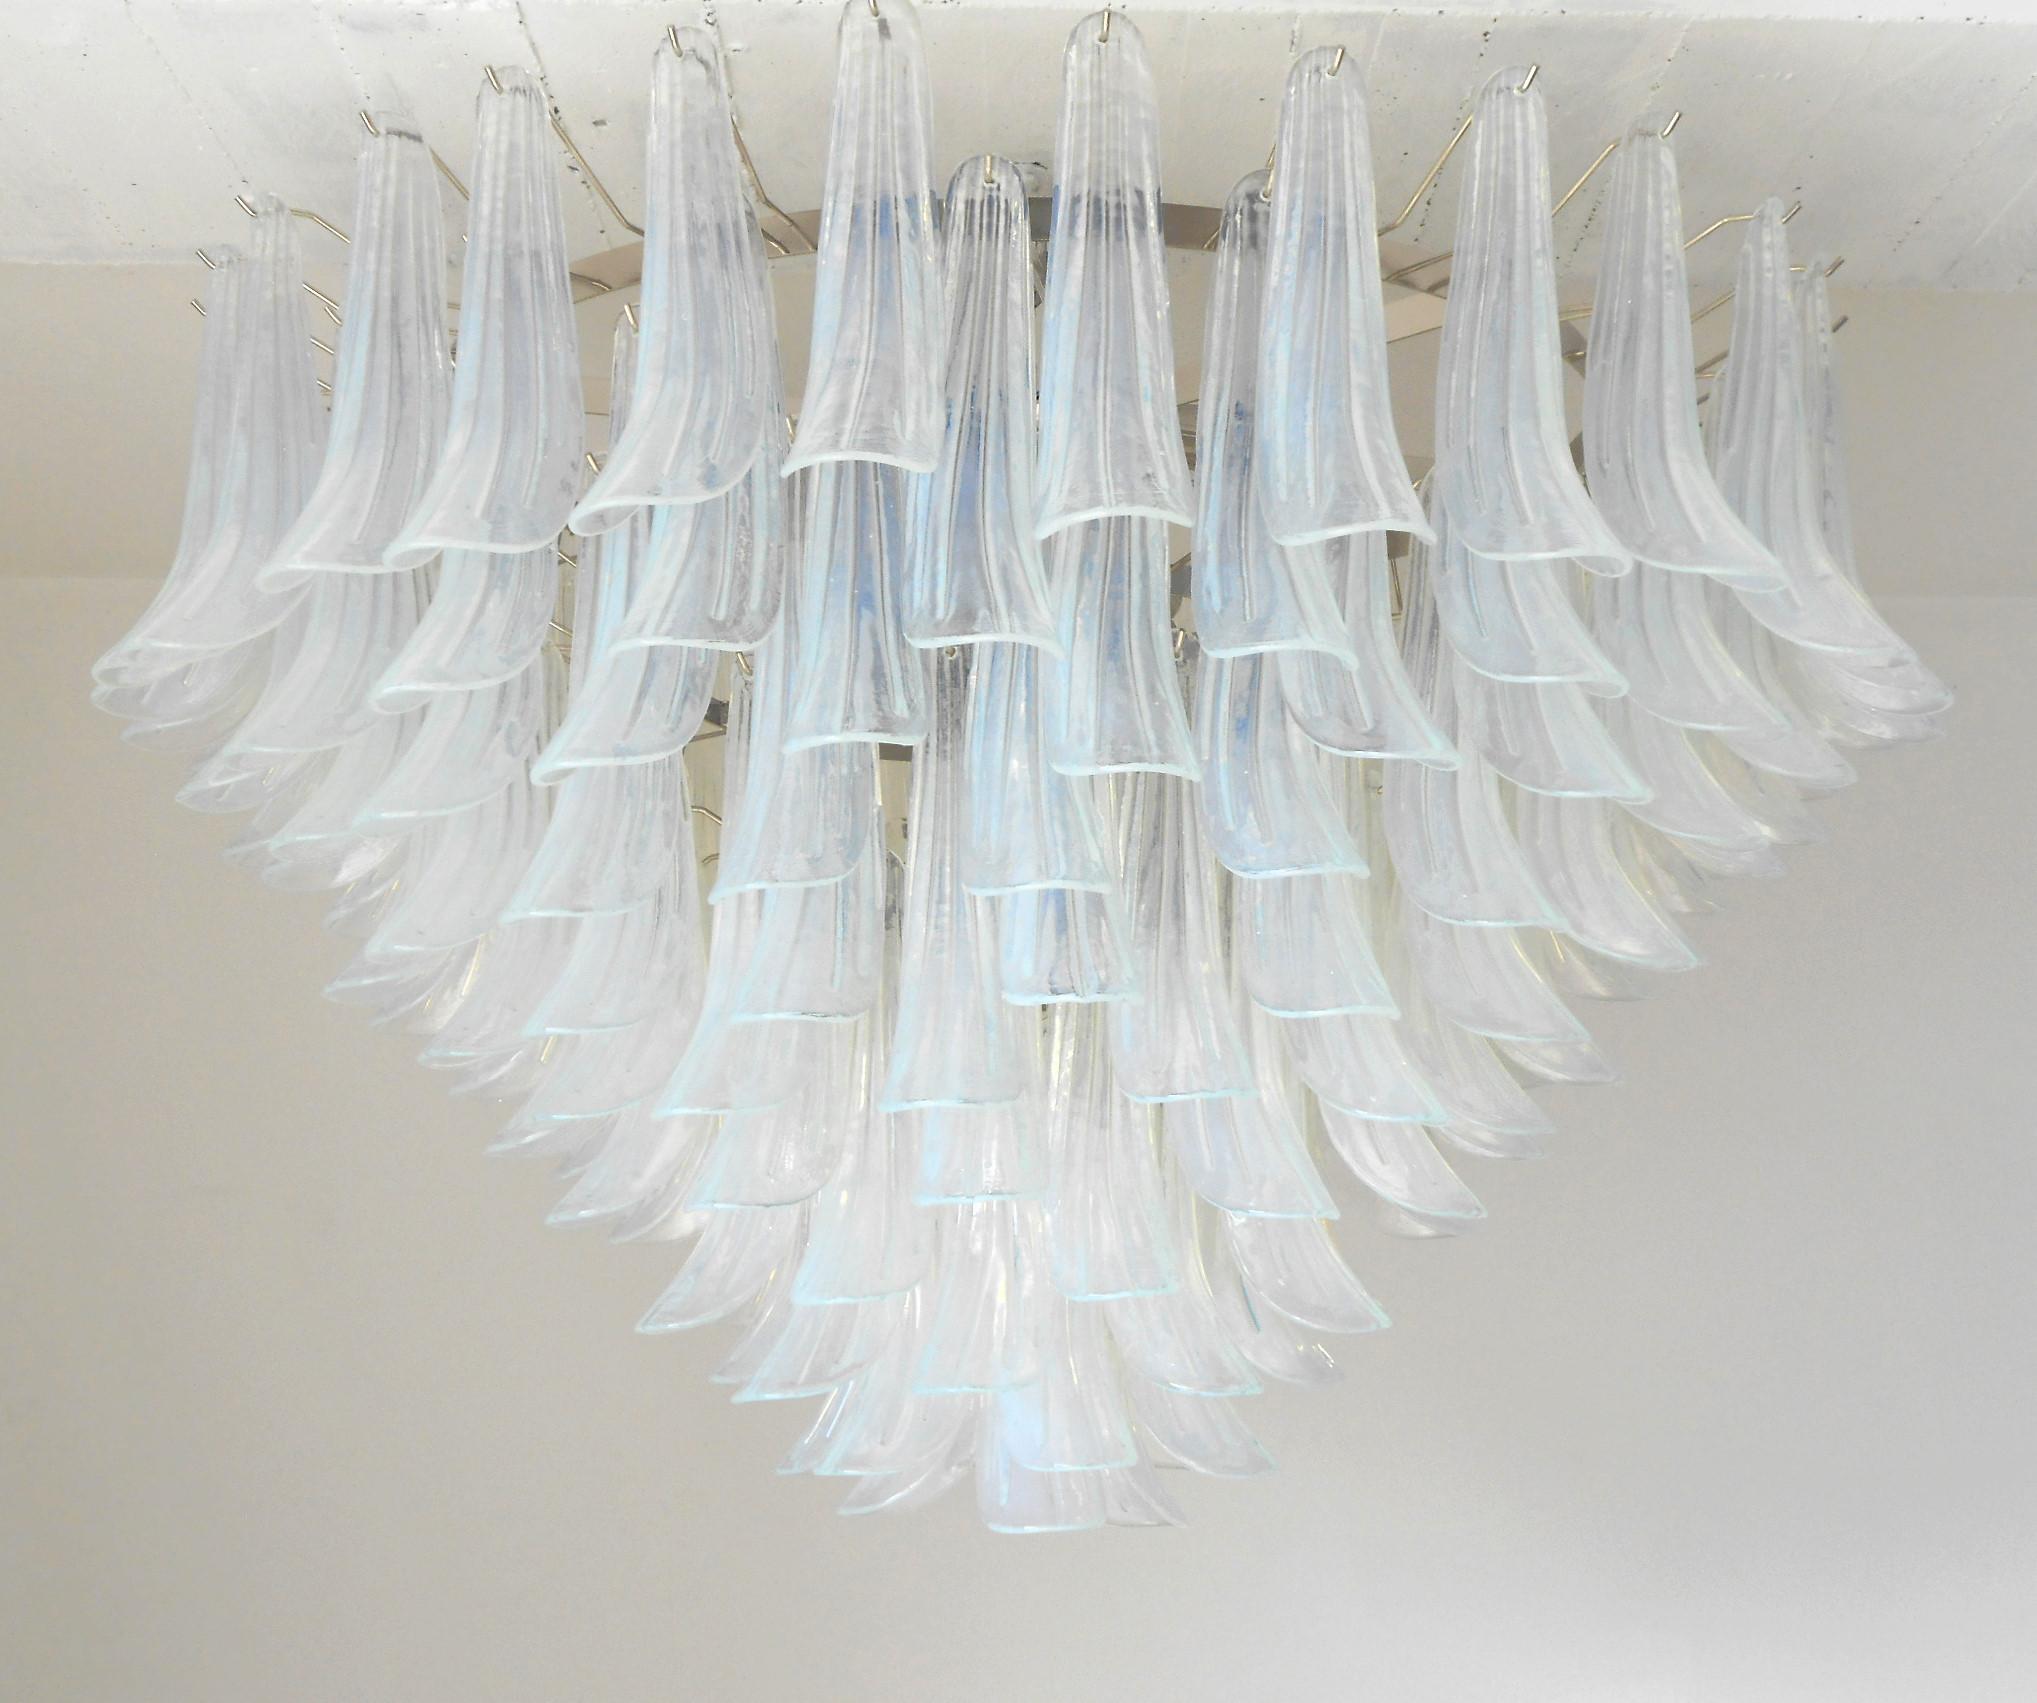 Italian chandelier shown with iridescent opaline Murano glass petals mounted on chrome finish frame / Designed by Fabio Bergomi for Fabio Ltd, inspired by Mazzega / Made in Italy
21 lights / E26 or E27 type / max 60W each
Measures: diameter 47